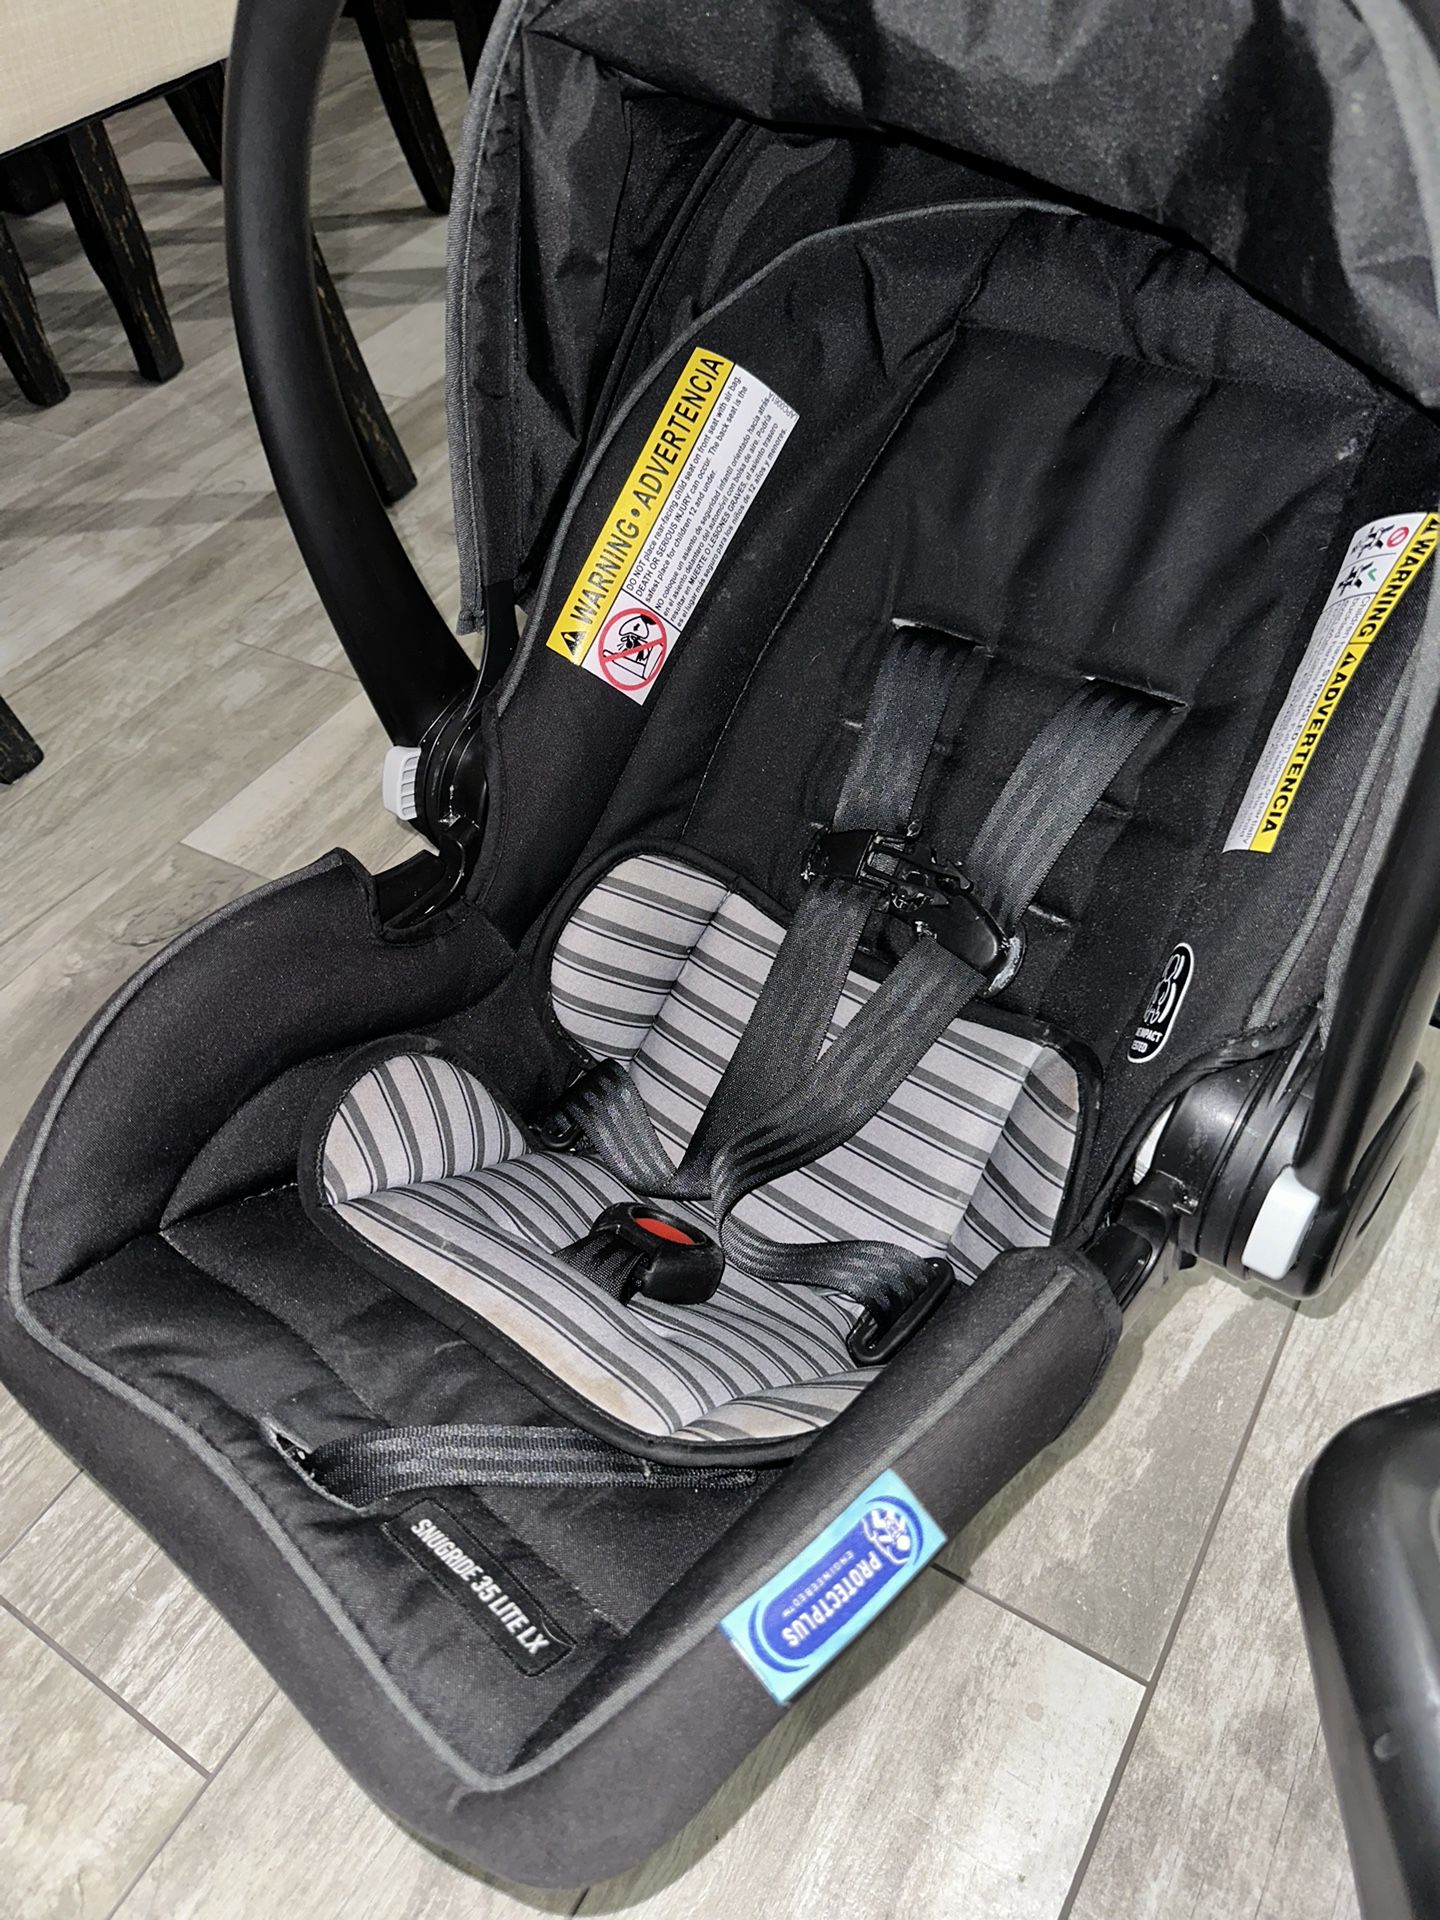 Graco Infant Car Seat With Base